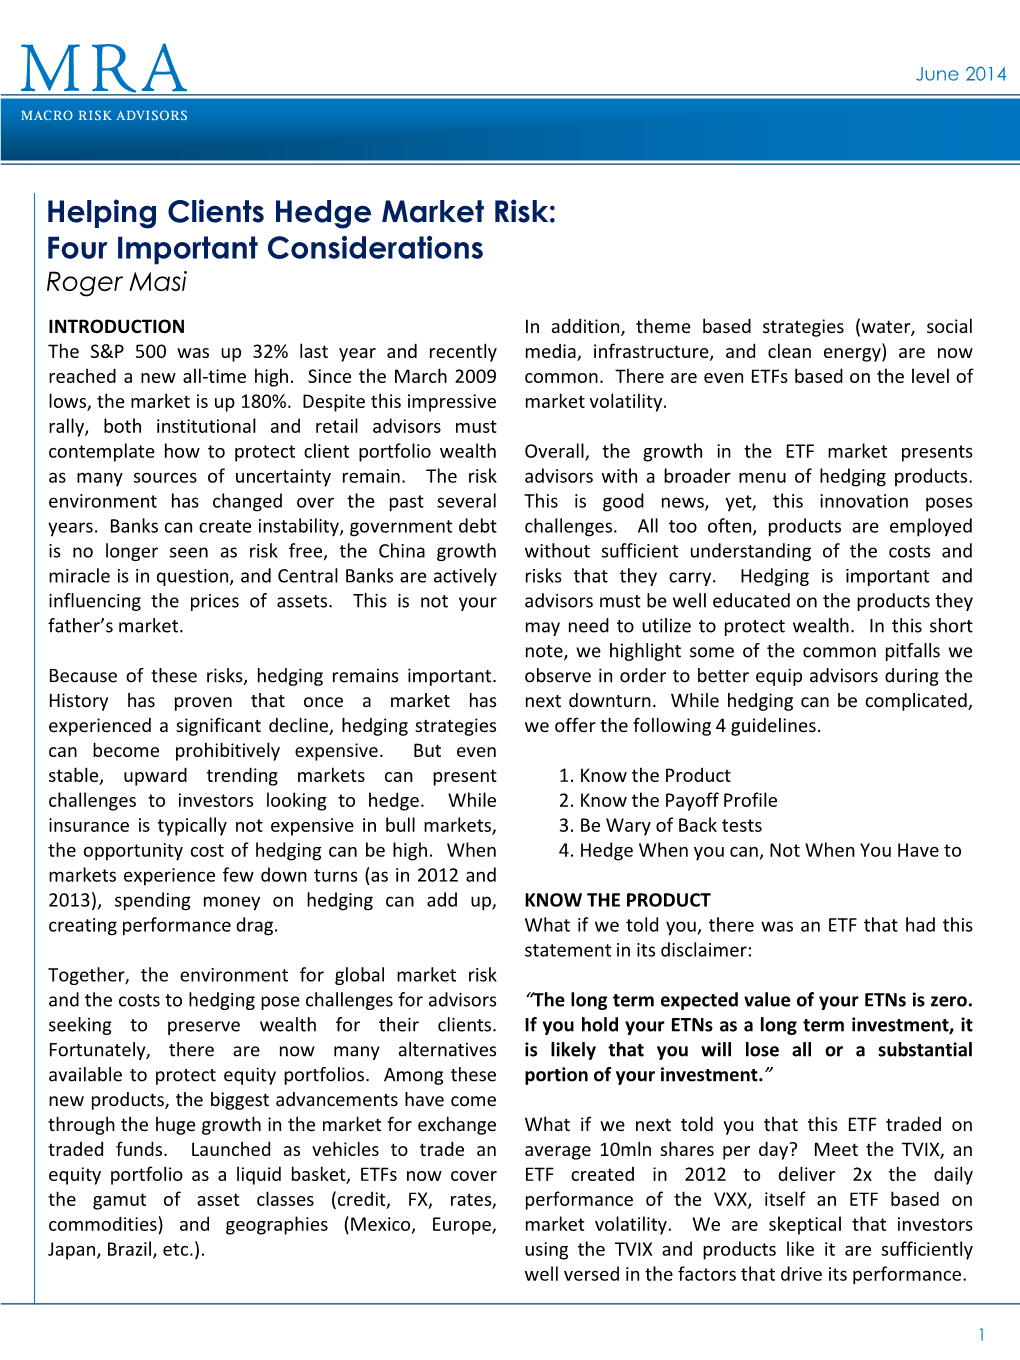 Helping Clients Hedge Market Risk: Four Important Considerations Roger Masi